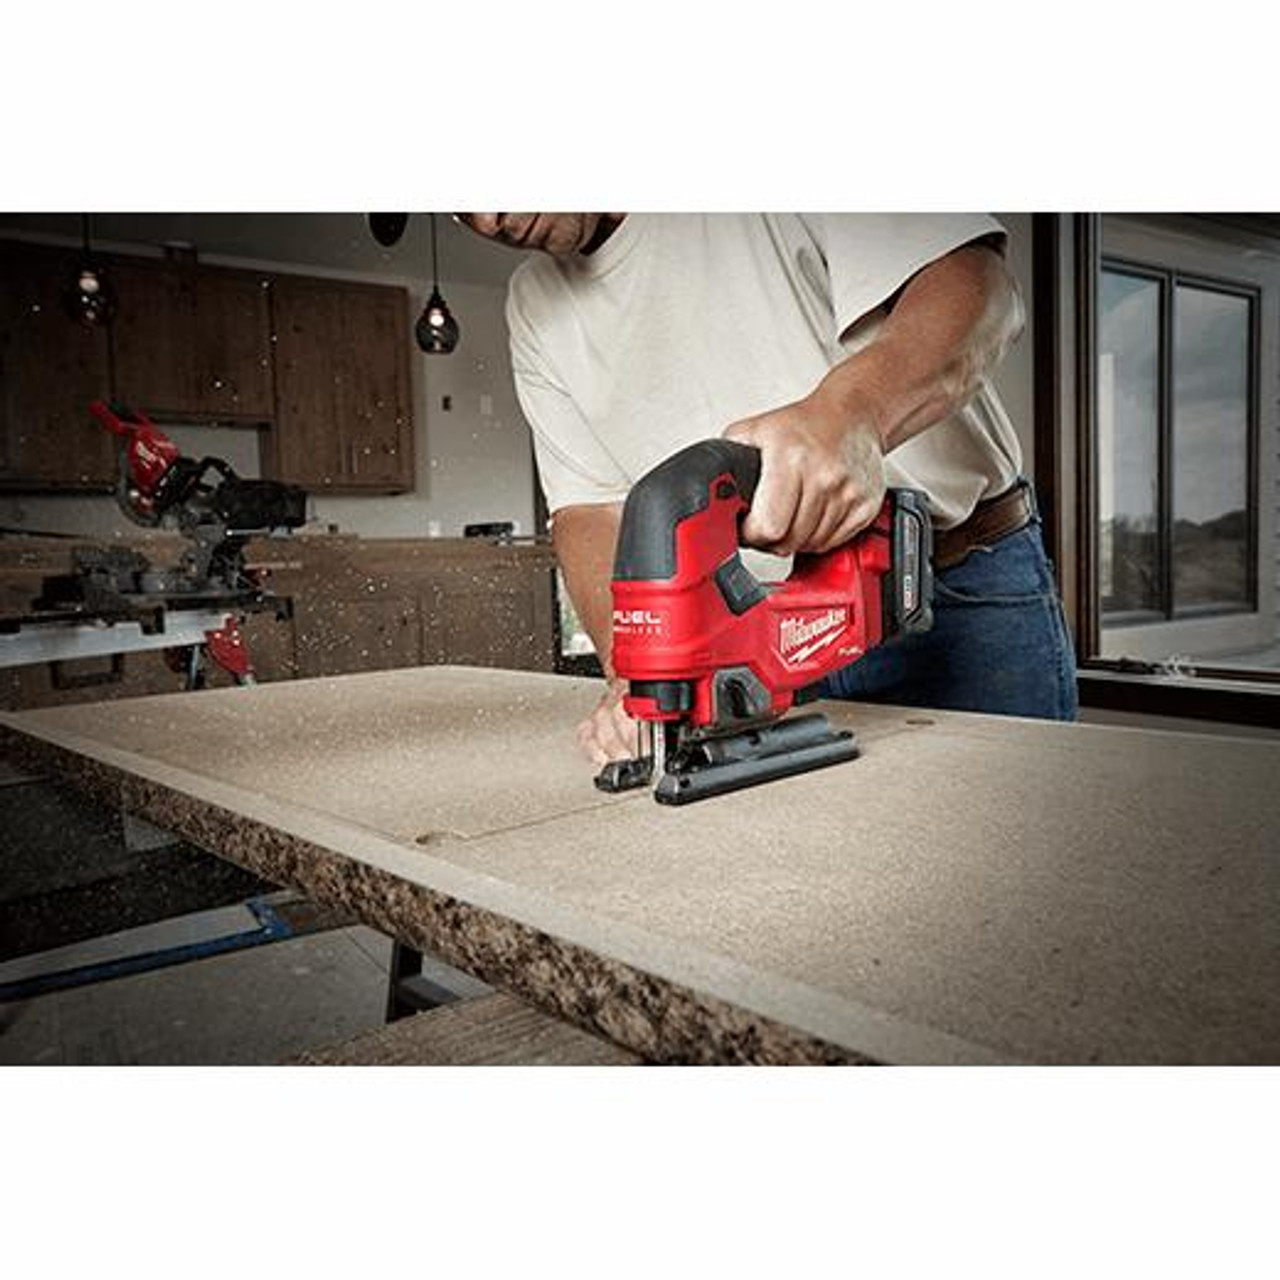  Milwaukee M18 FUEL D-Handle Jig Saw (Tool Only)2737-20 